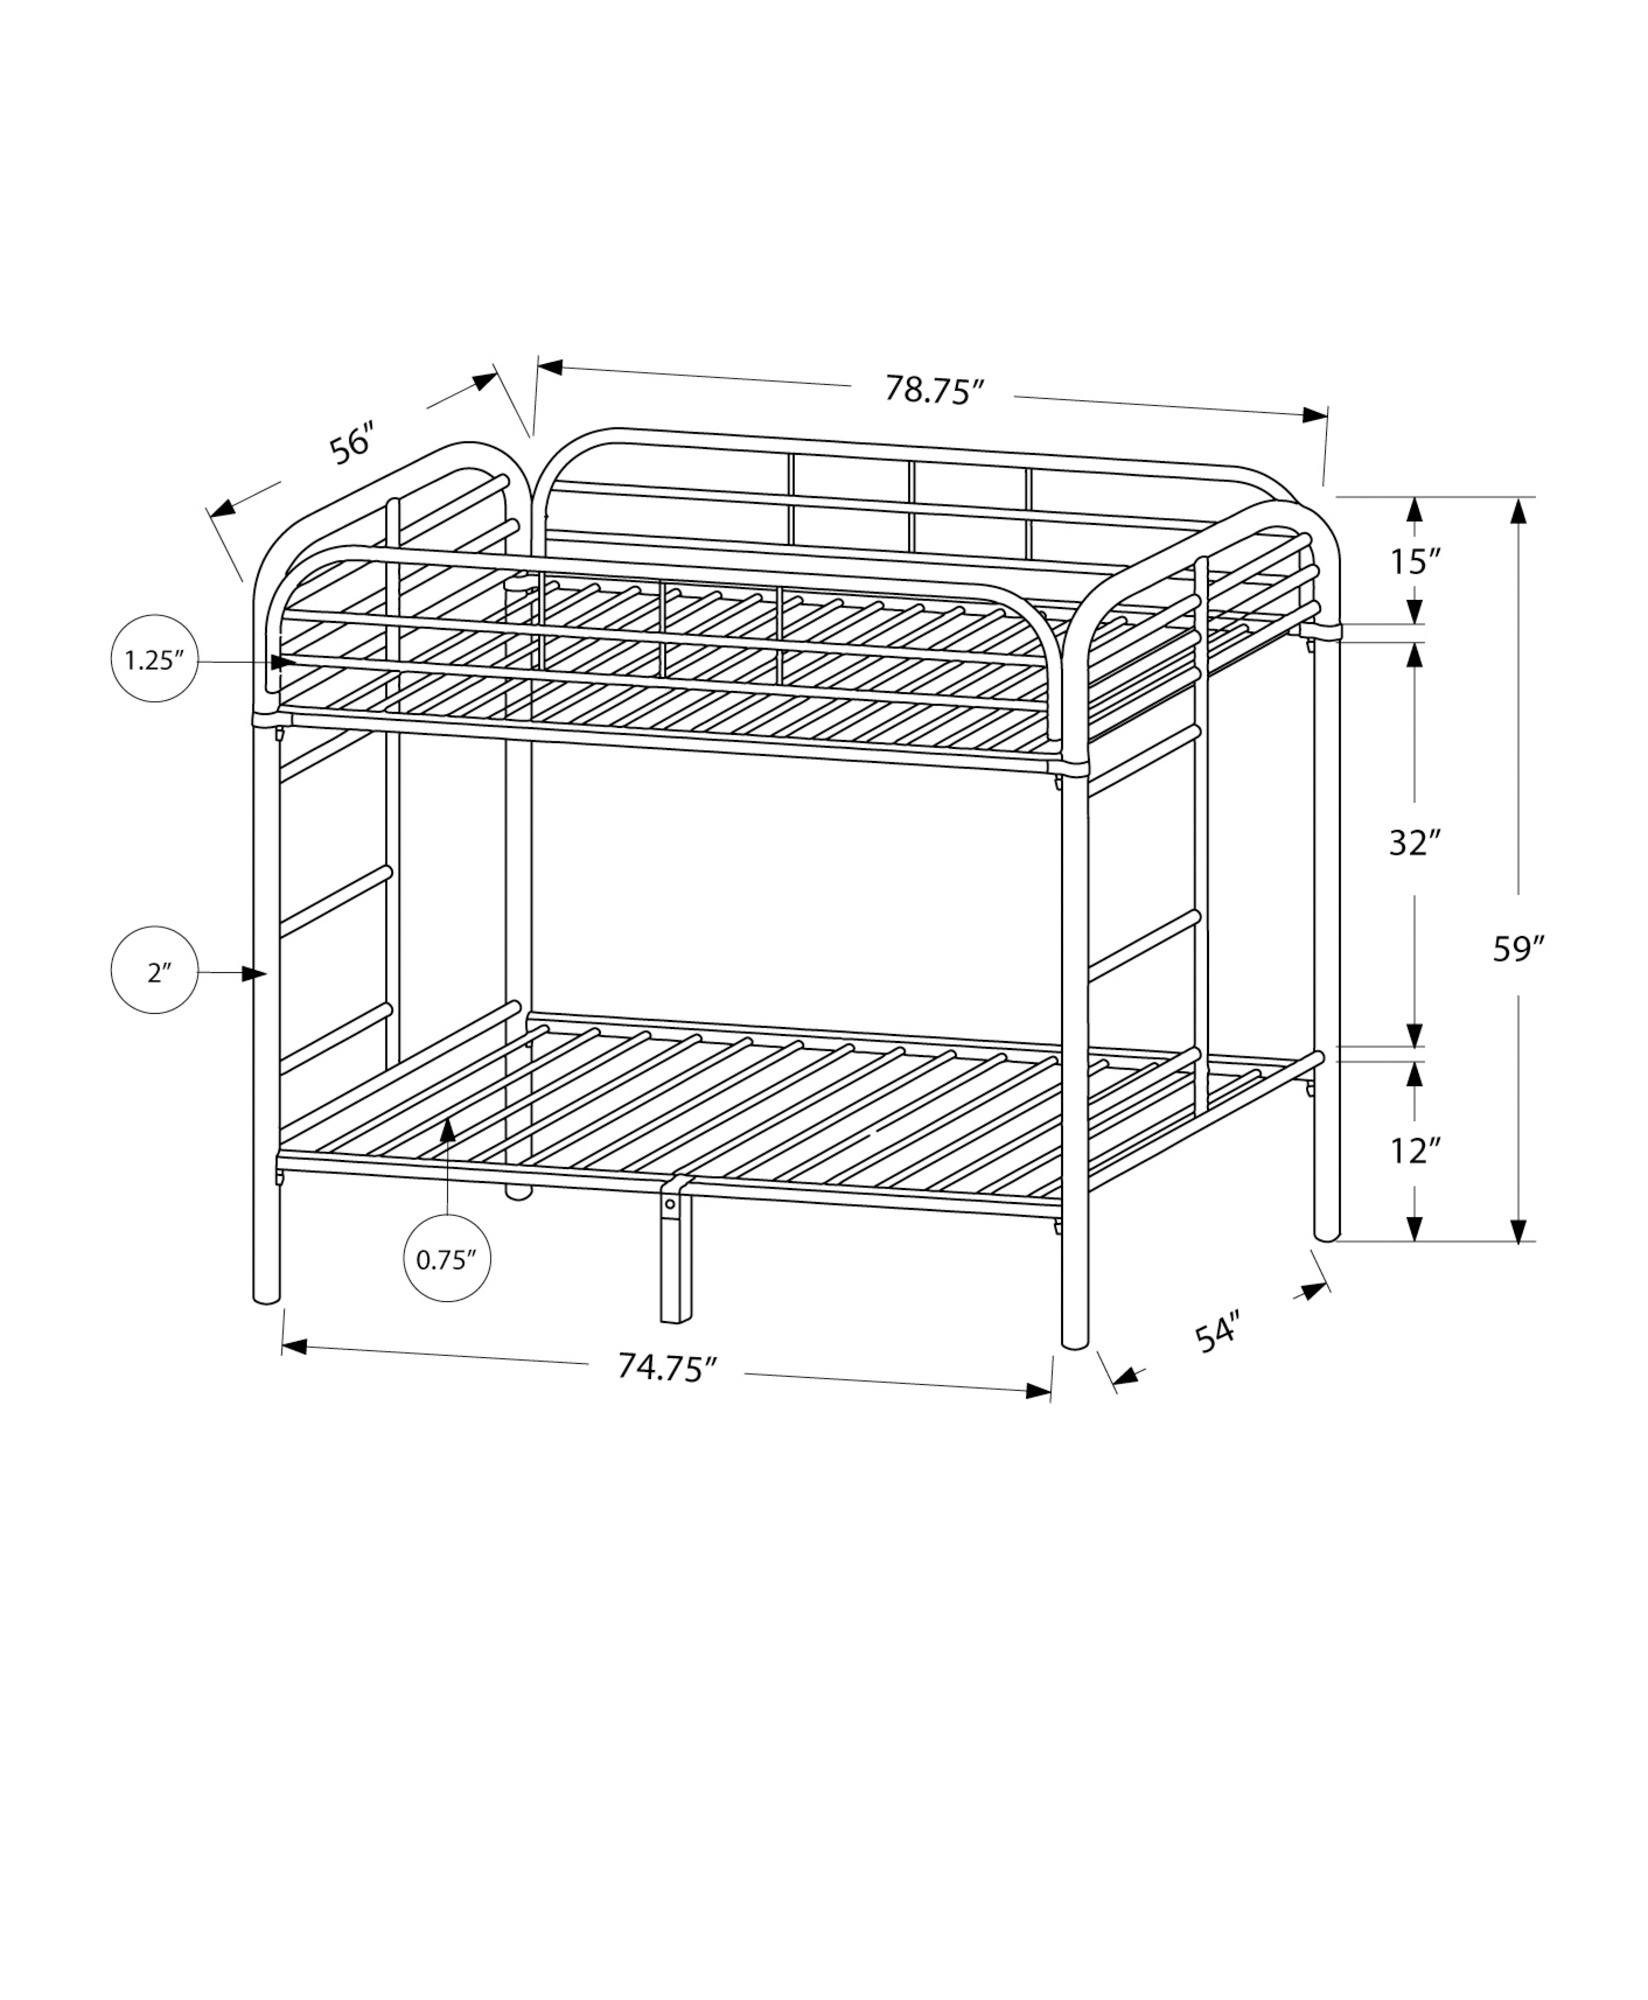 Full Full Size Silver Metal Bunk Bed